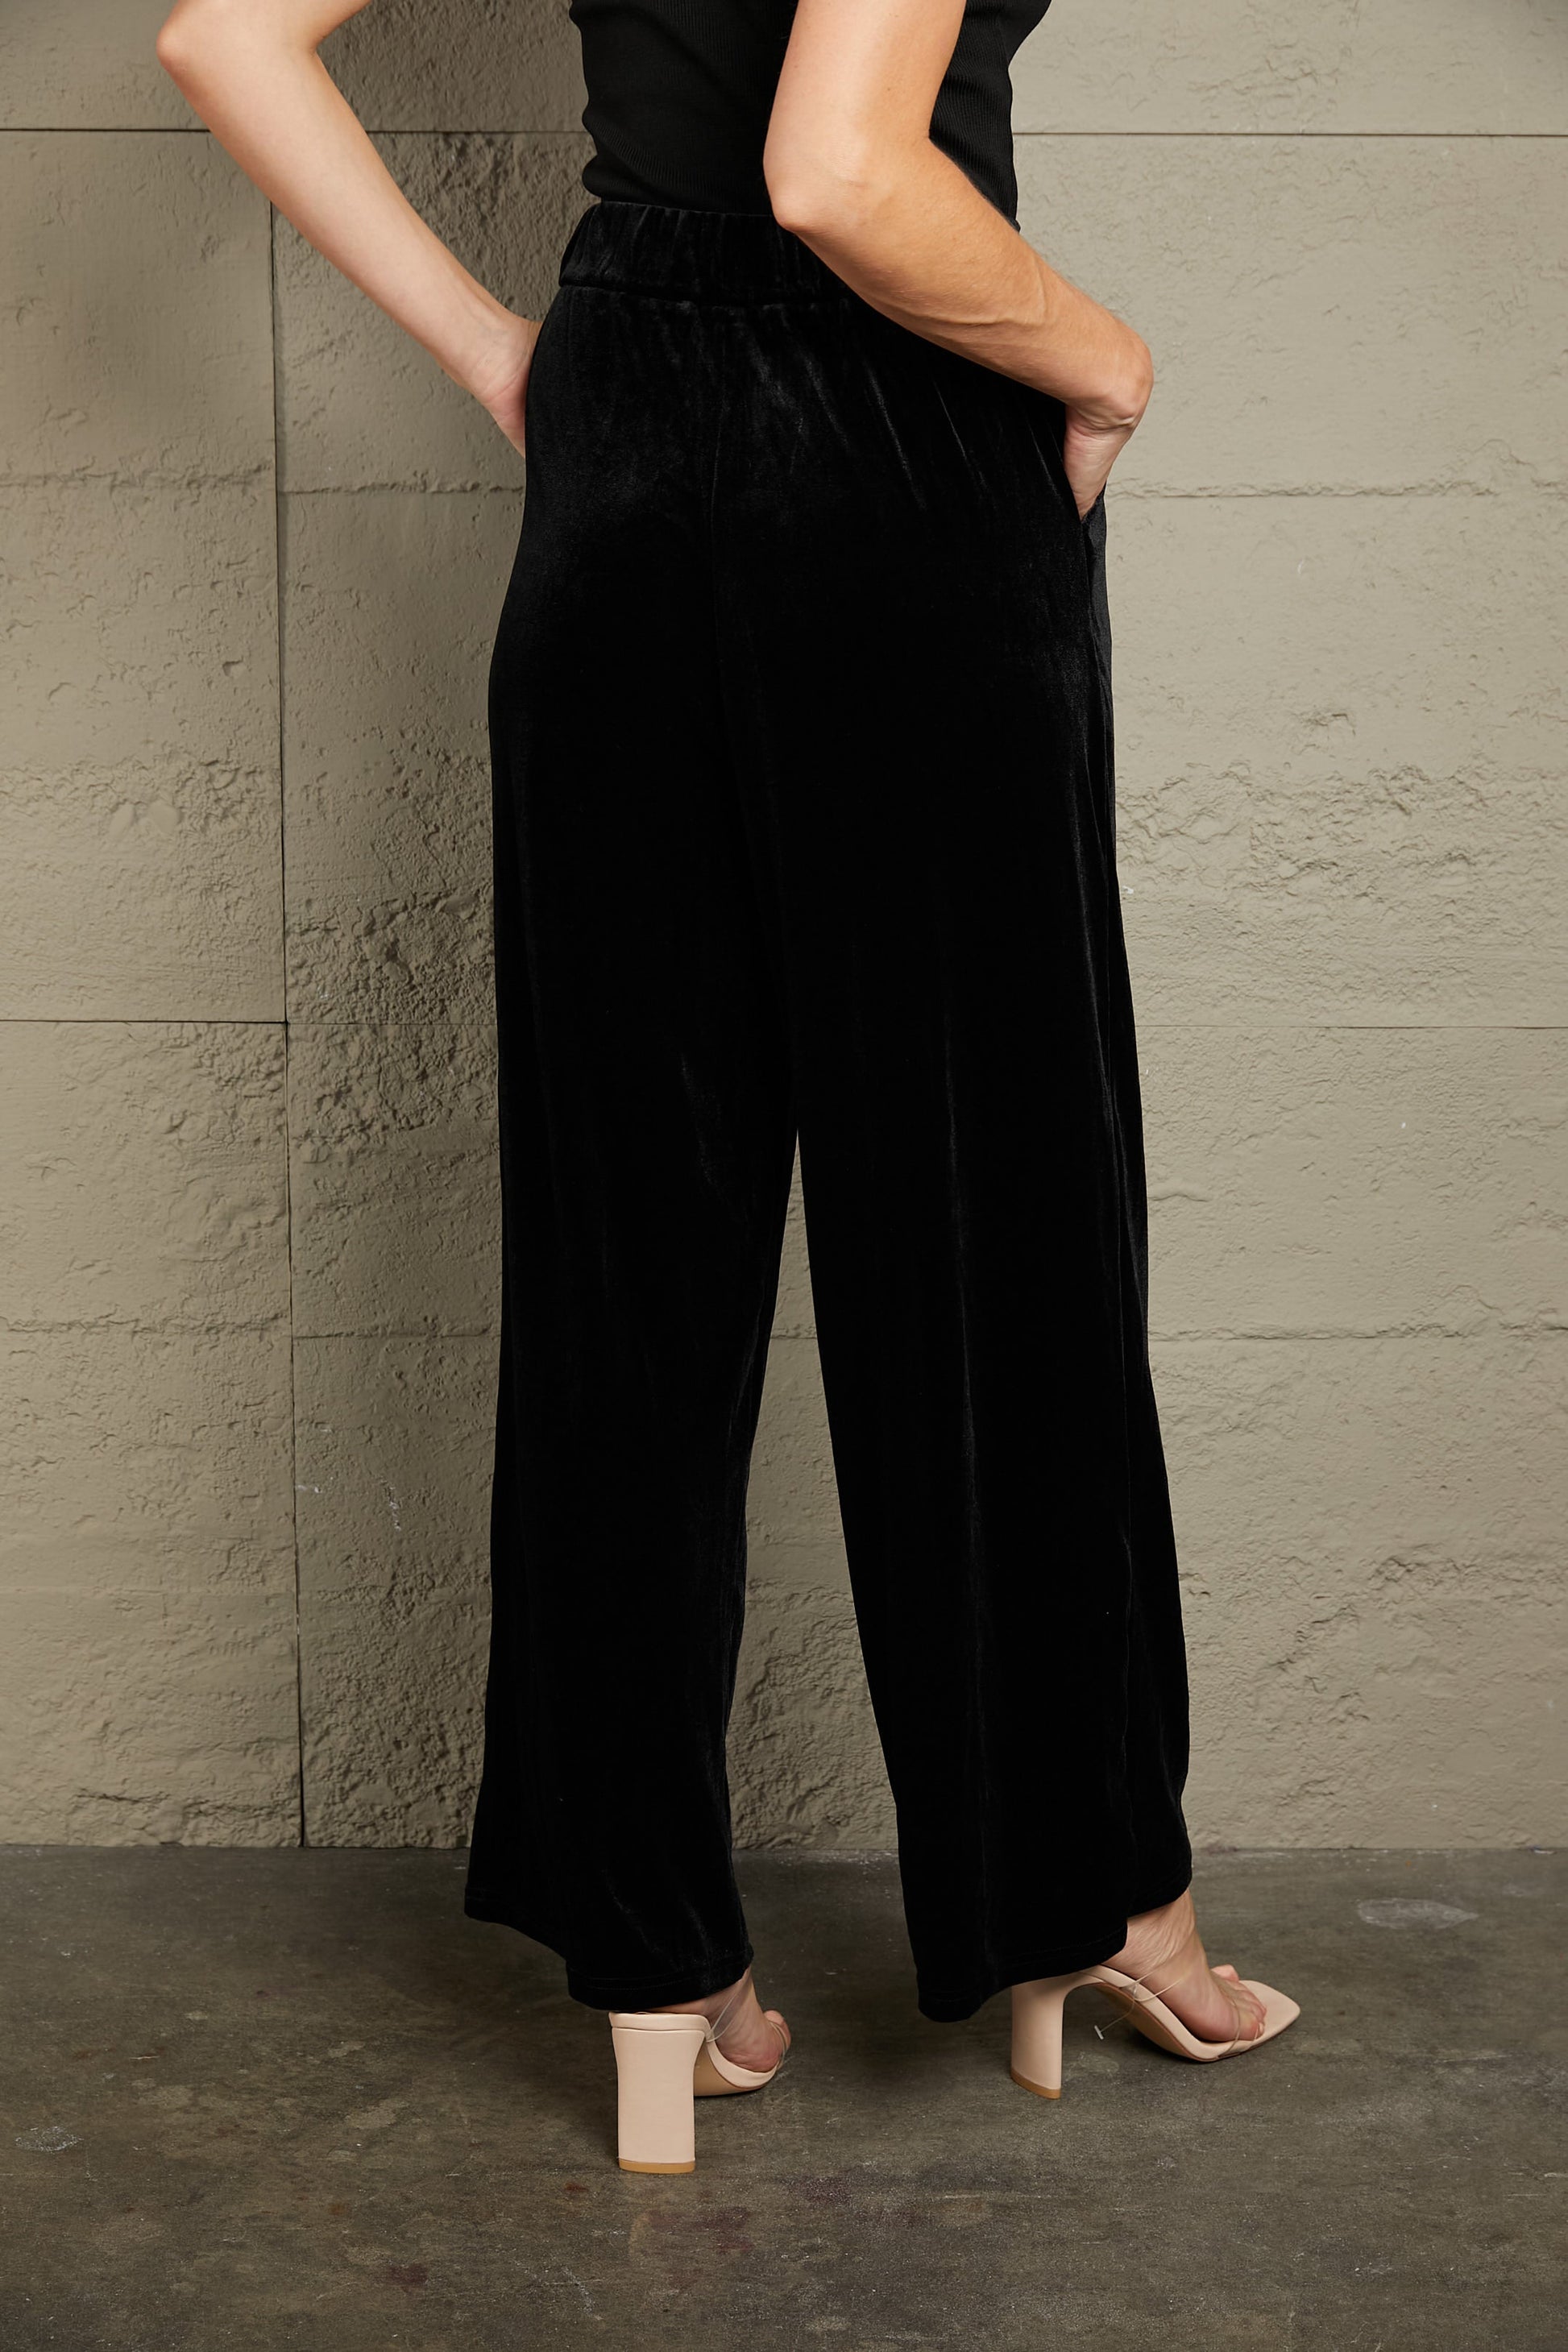 Loose Fit High Waist Long Pants with Pockets - Bottoms - Pants - 2 - 2024